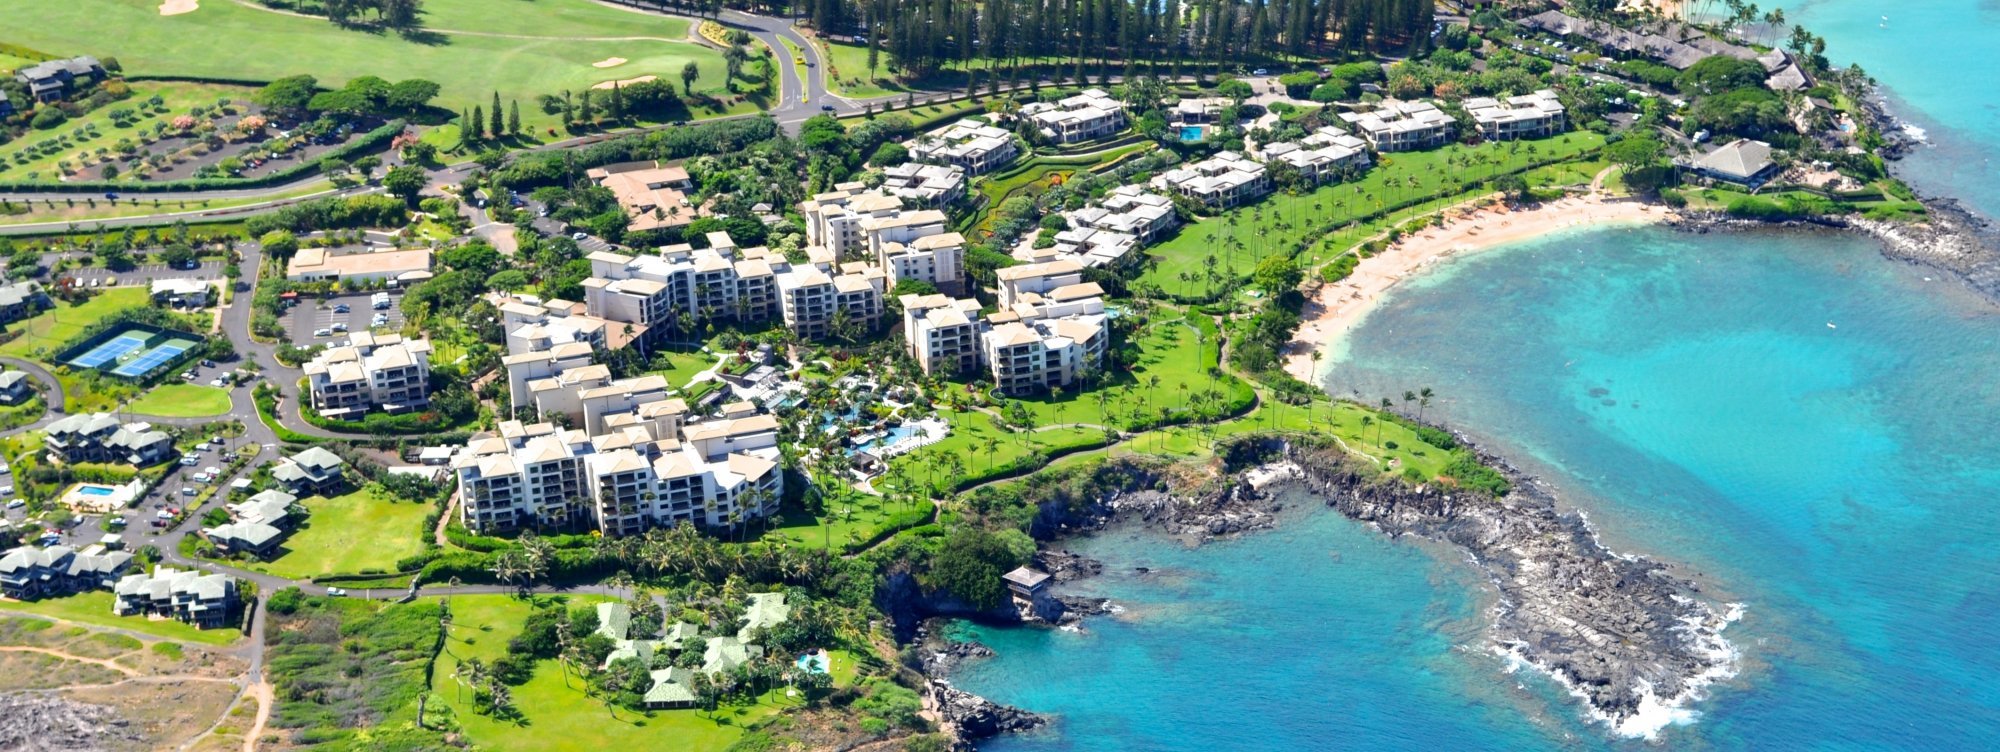 price of residence at montage maui